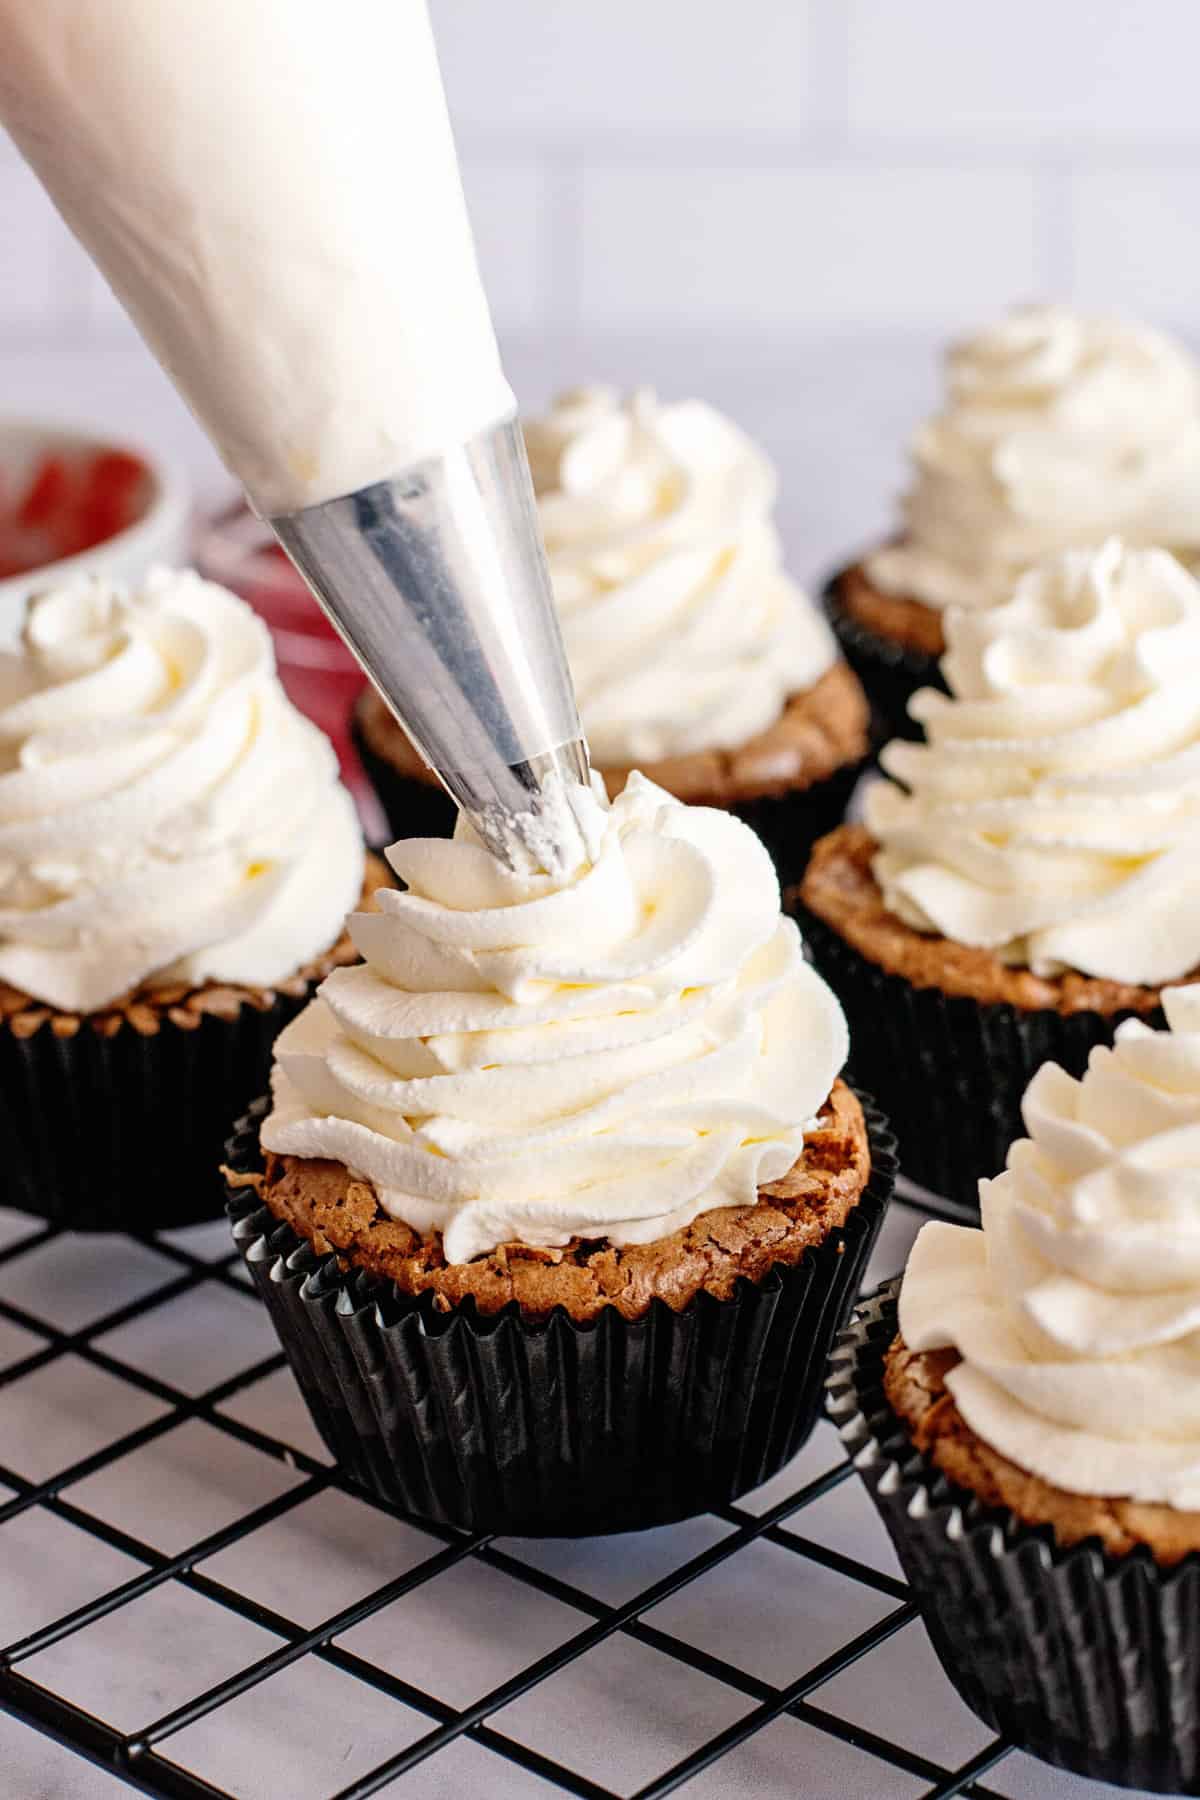 pipe frosting onto filled cupcakes 